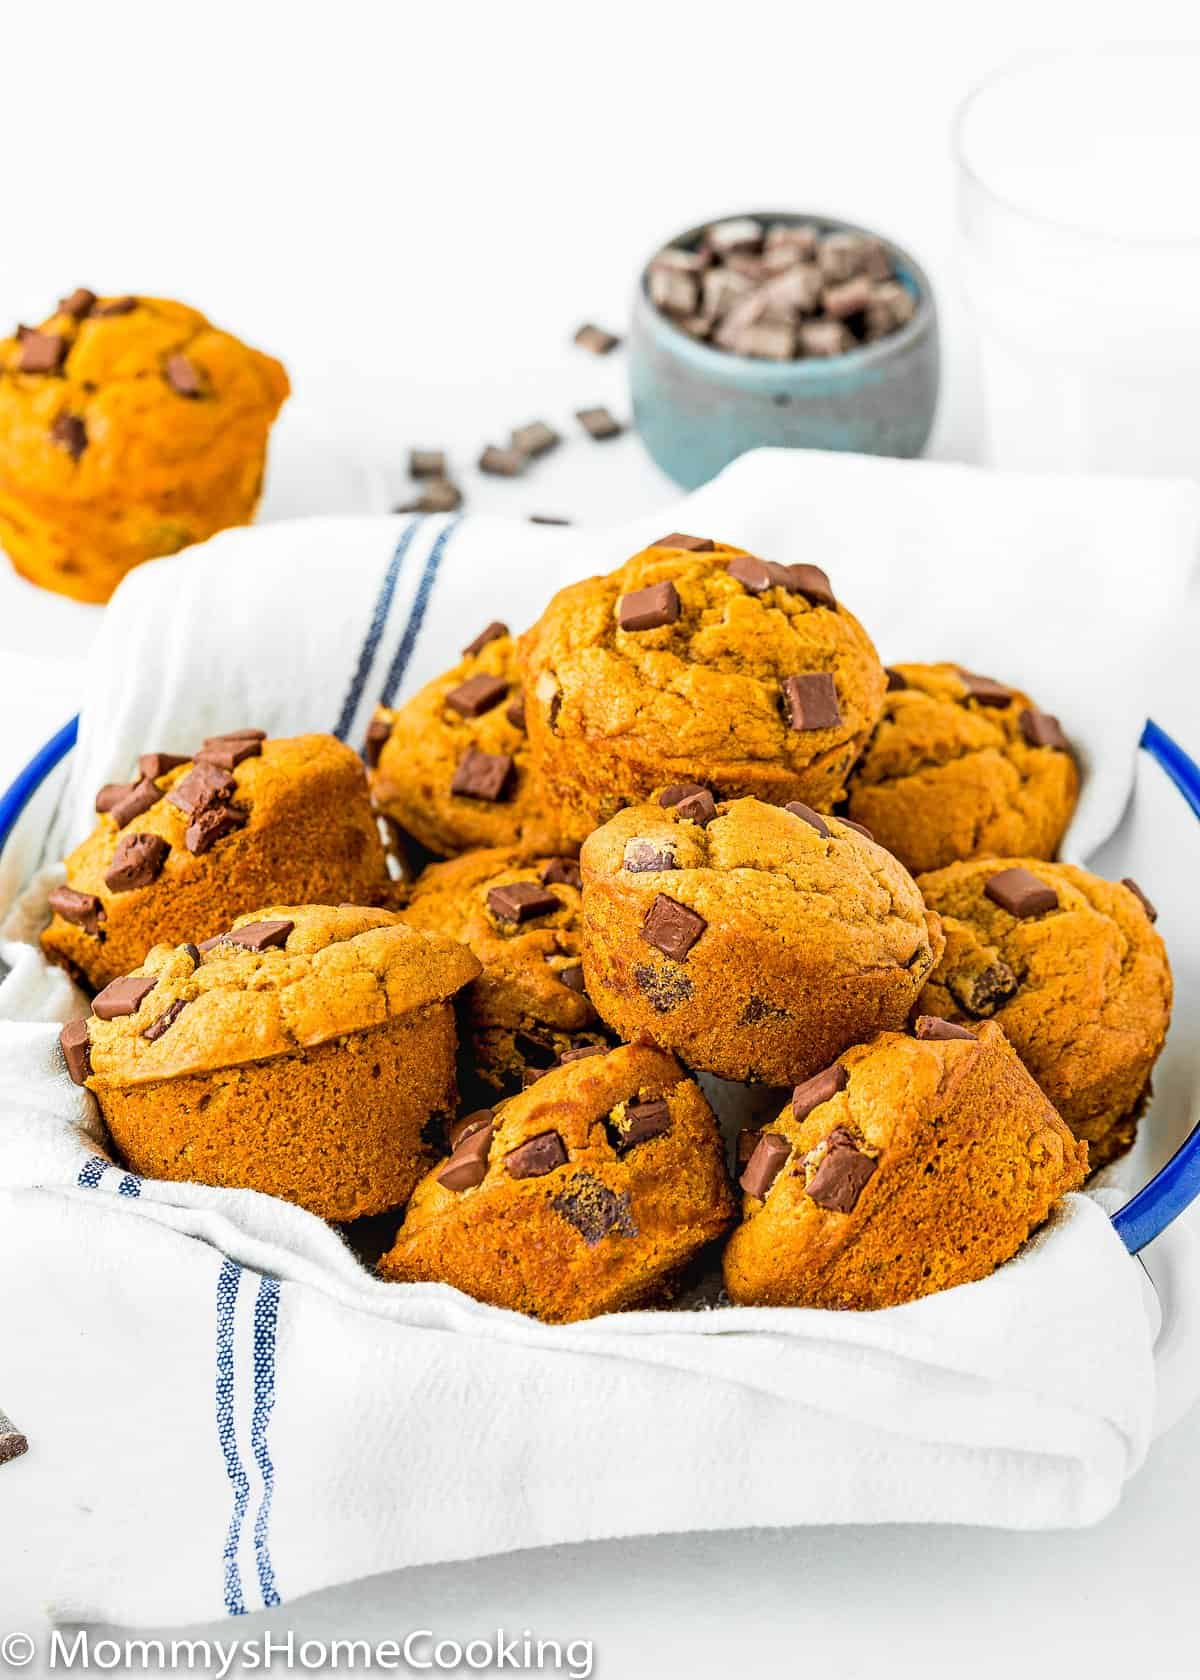 Eggless Chocolate Chip Pumpkin Muffins on a plate with a kitchen napkin.